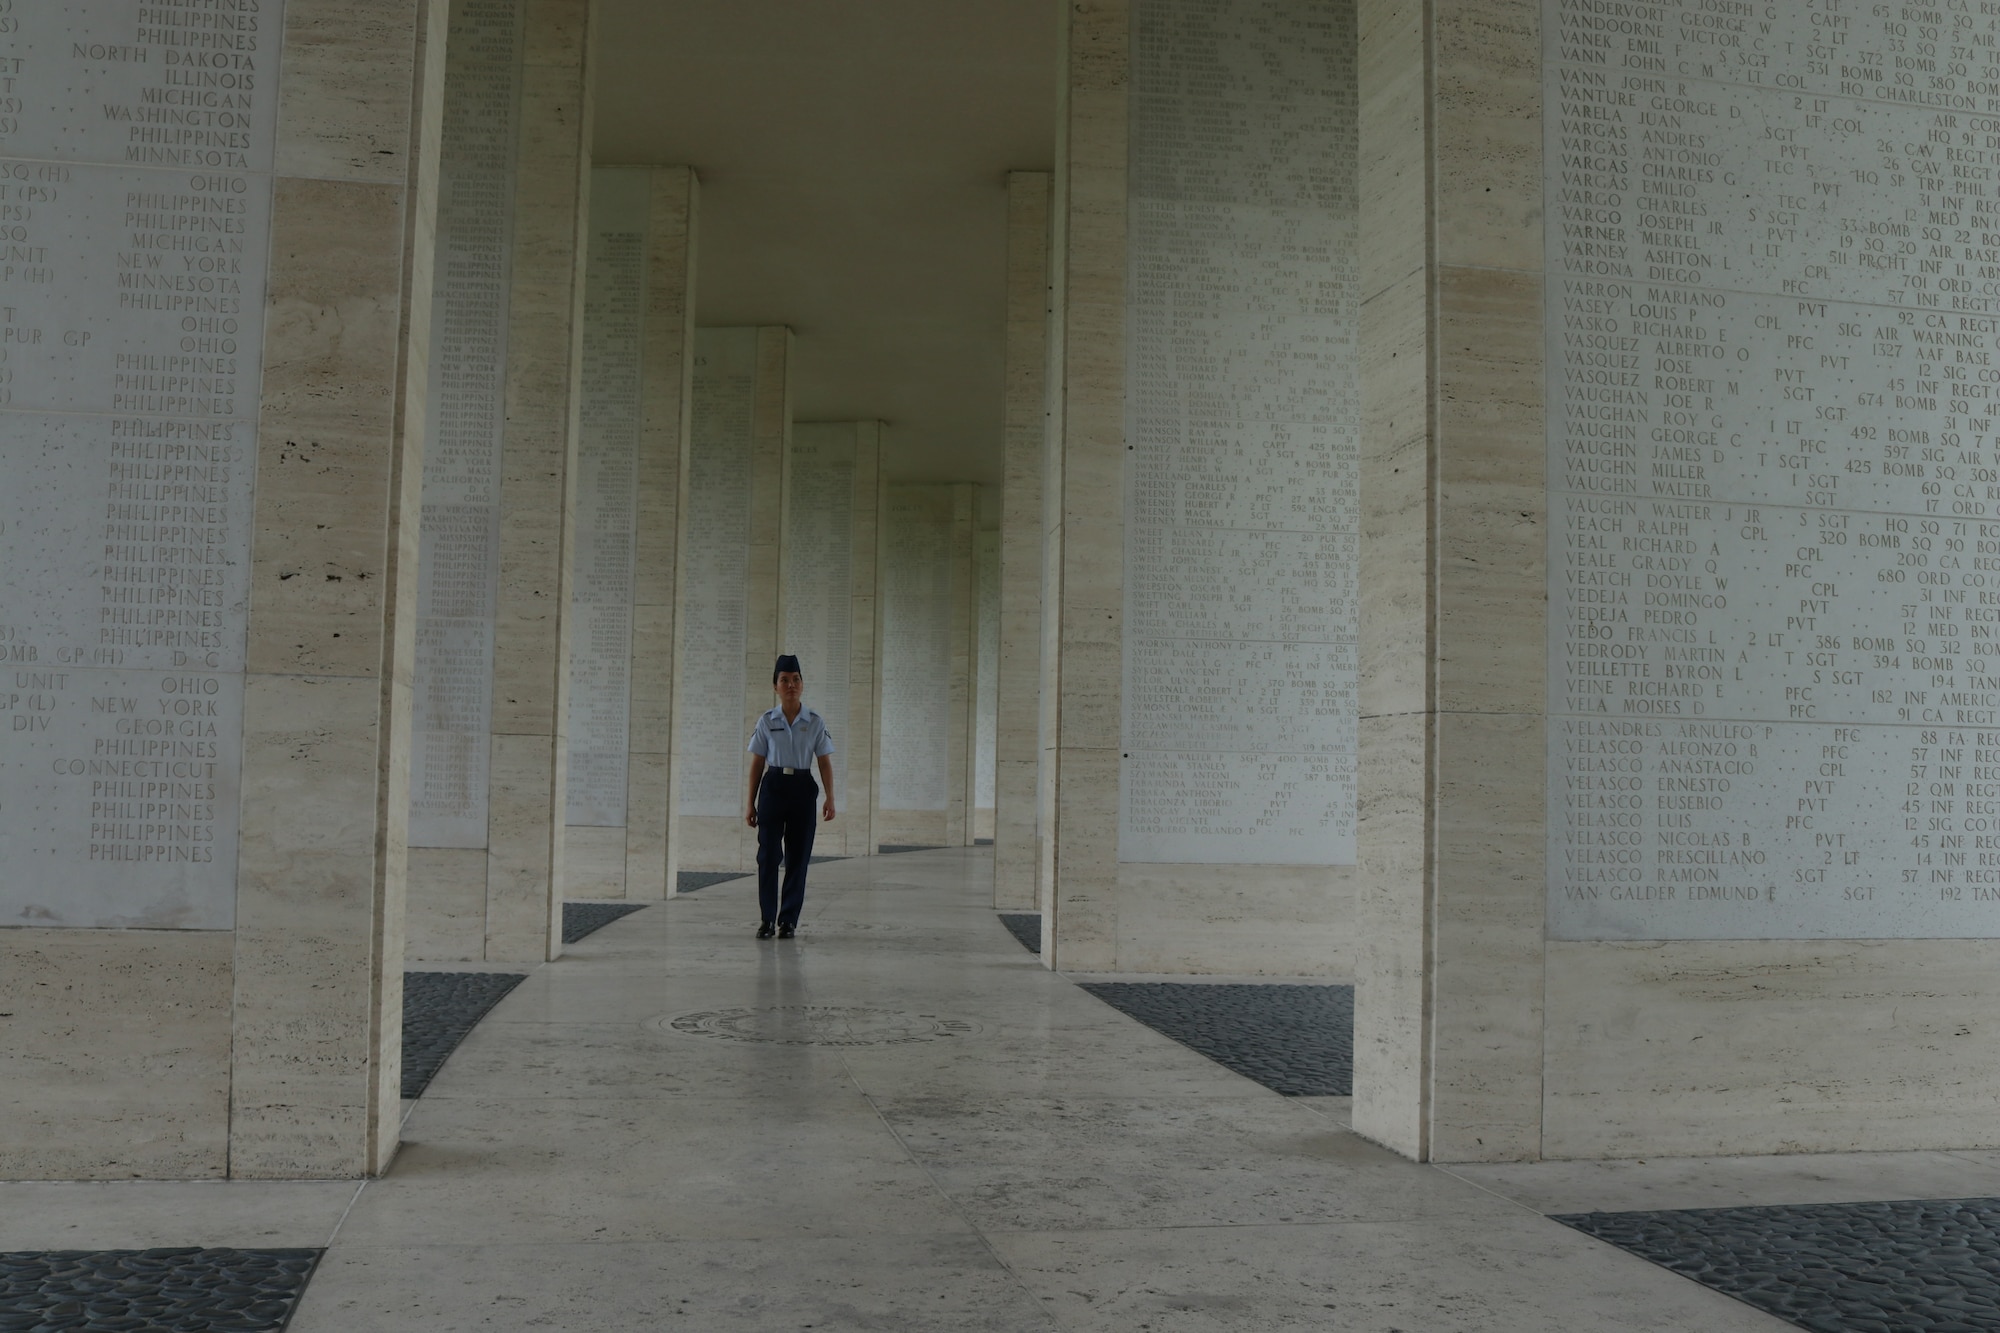 Airman 1st Class Ana Olarke, 317th Operations Support Squadron aircrew flight equipment journeyman, walks between the Walls of Missing at the Manila American Cemetery in Manila, Philippines, Feb. 17, 2020.